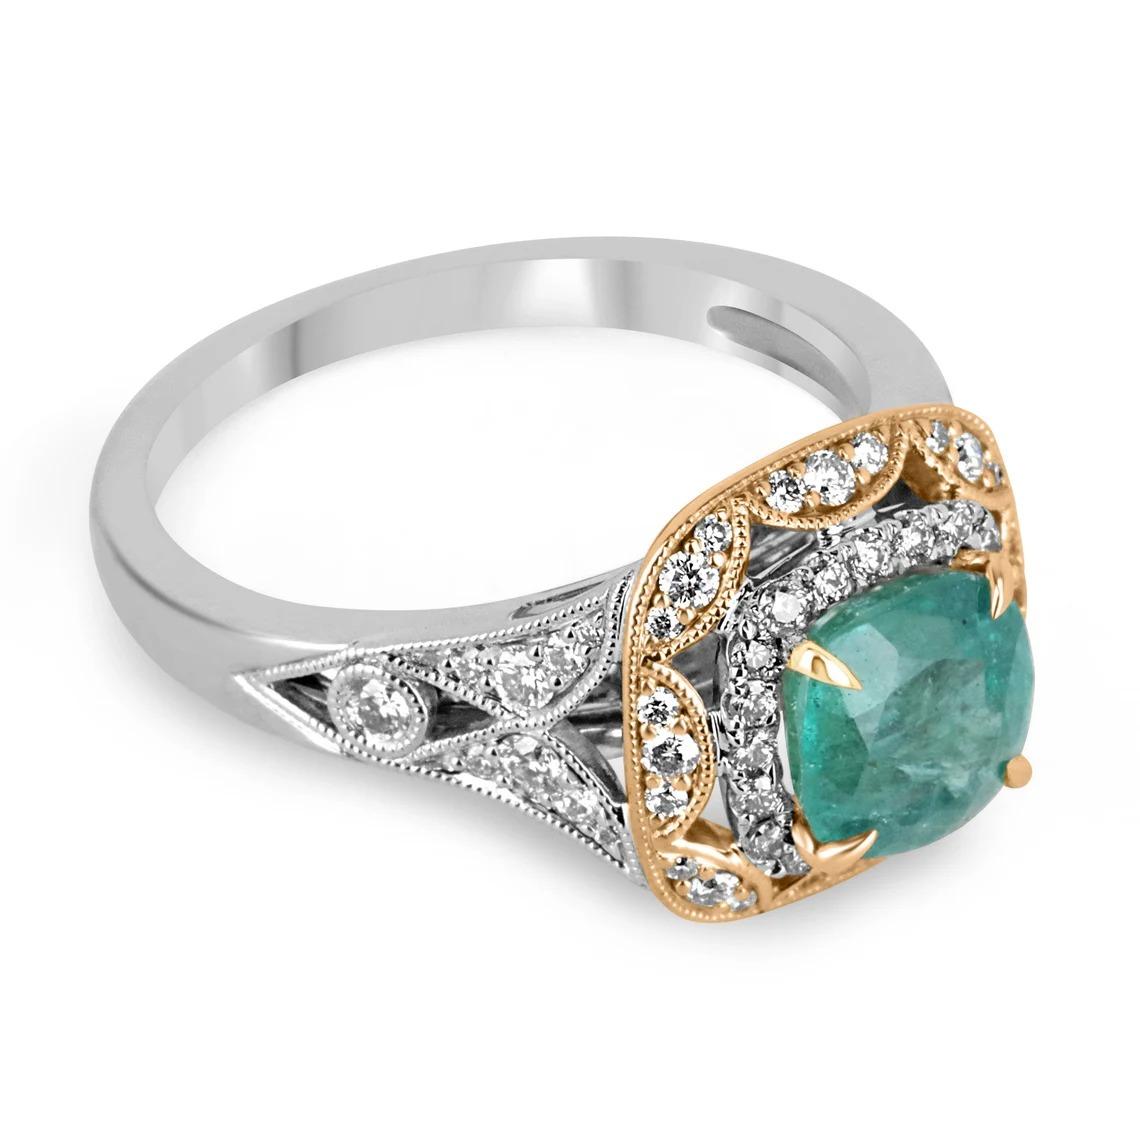 Setting Style: Prong/Pave
Setting Material: 14K White & Rose Gold
Setting Weight: 4.6 Grams

Main Stone: Emerald
Shape: Cushion Cut
Weight: 1.46-Carats
Clarity: Semi-Transparent
Color: Ocean Green
Luster: Excellent-Very Good
Treatments: Natural,